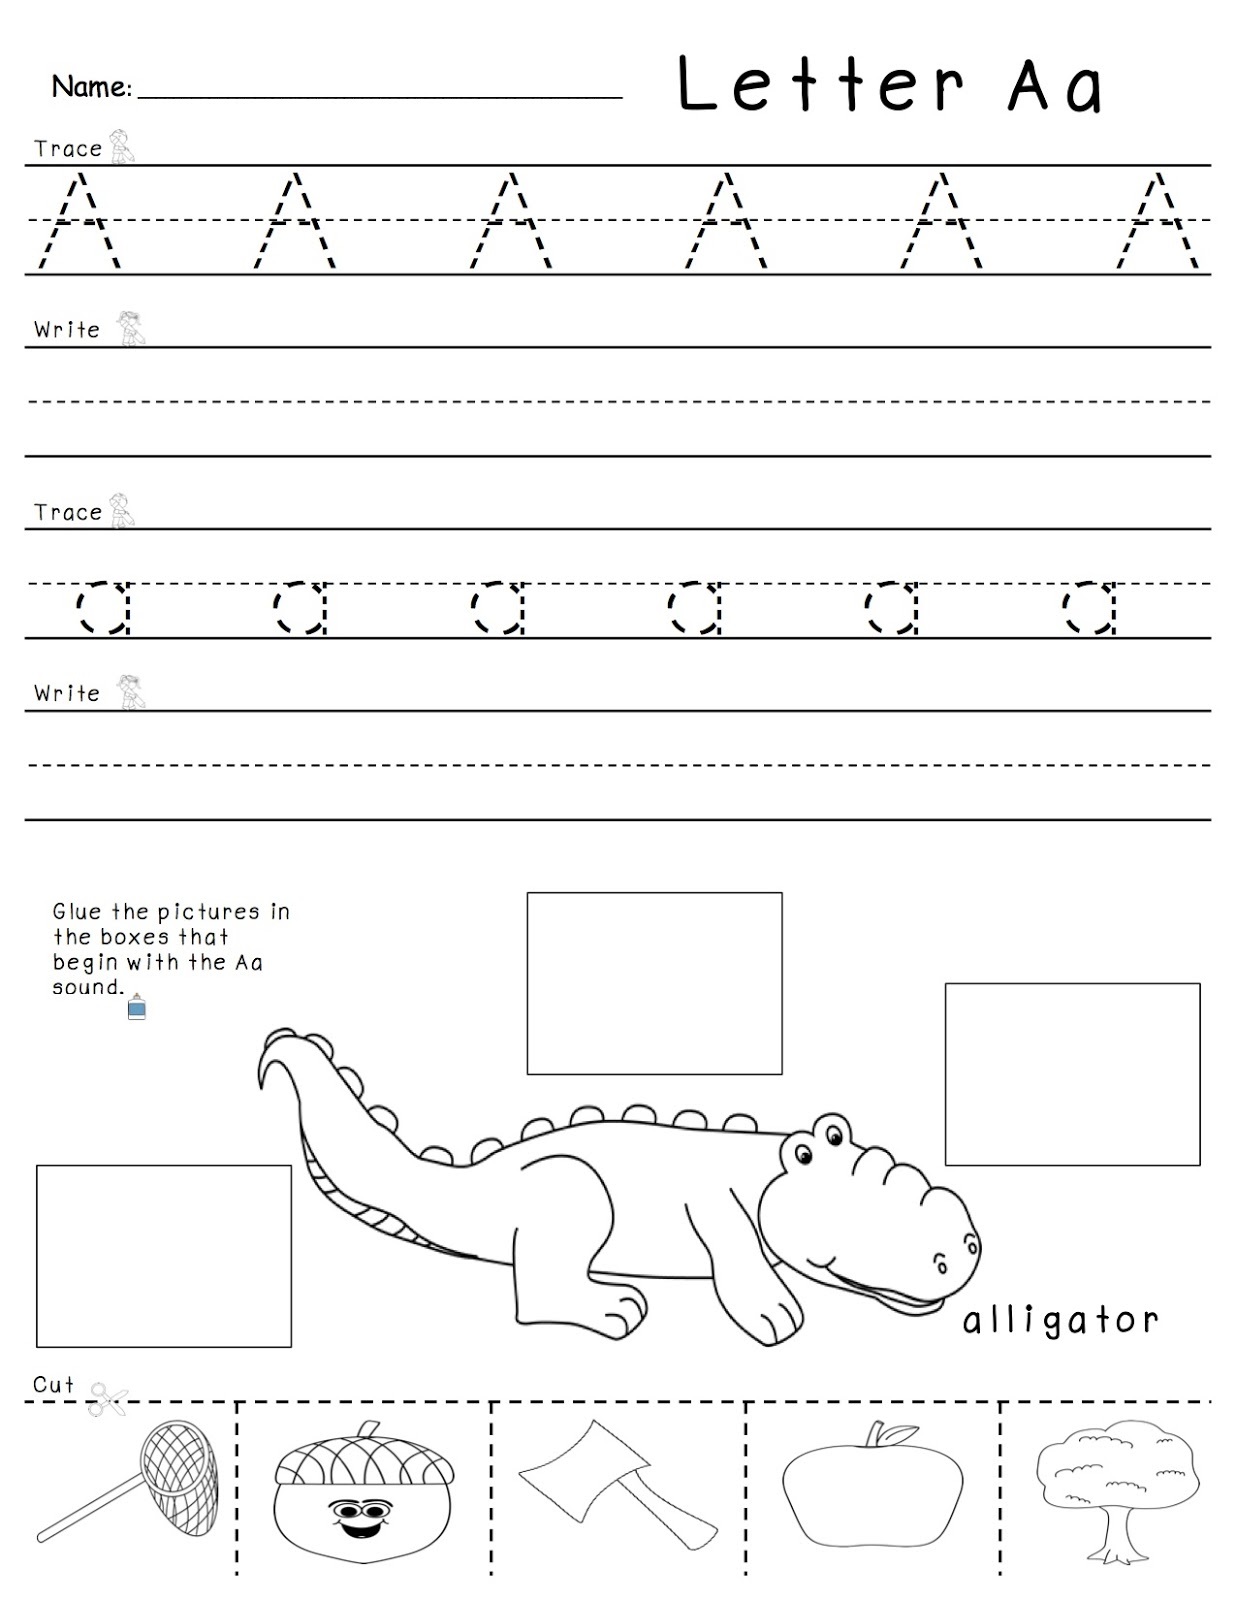 trace the letter a alligator